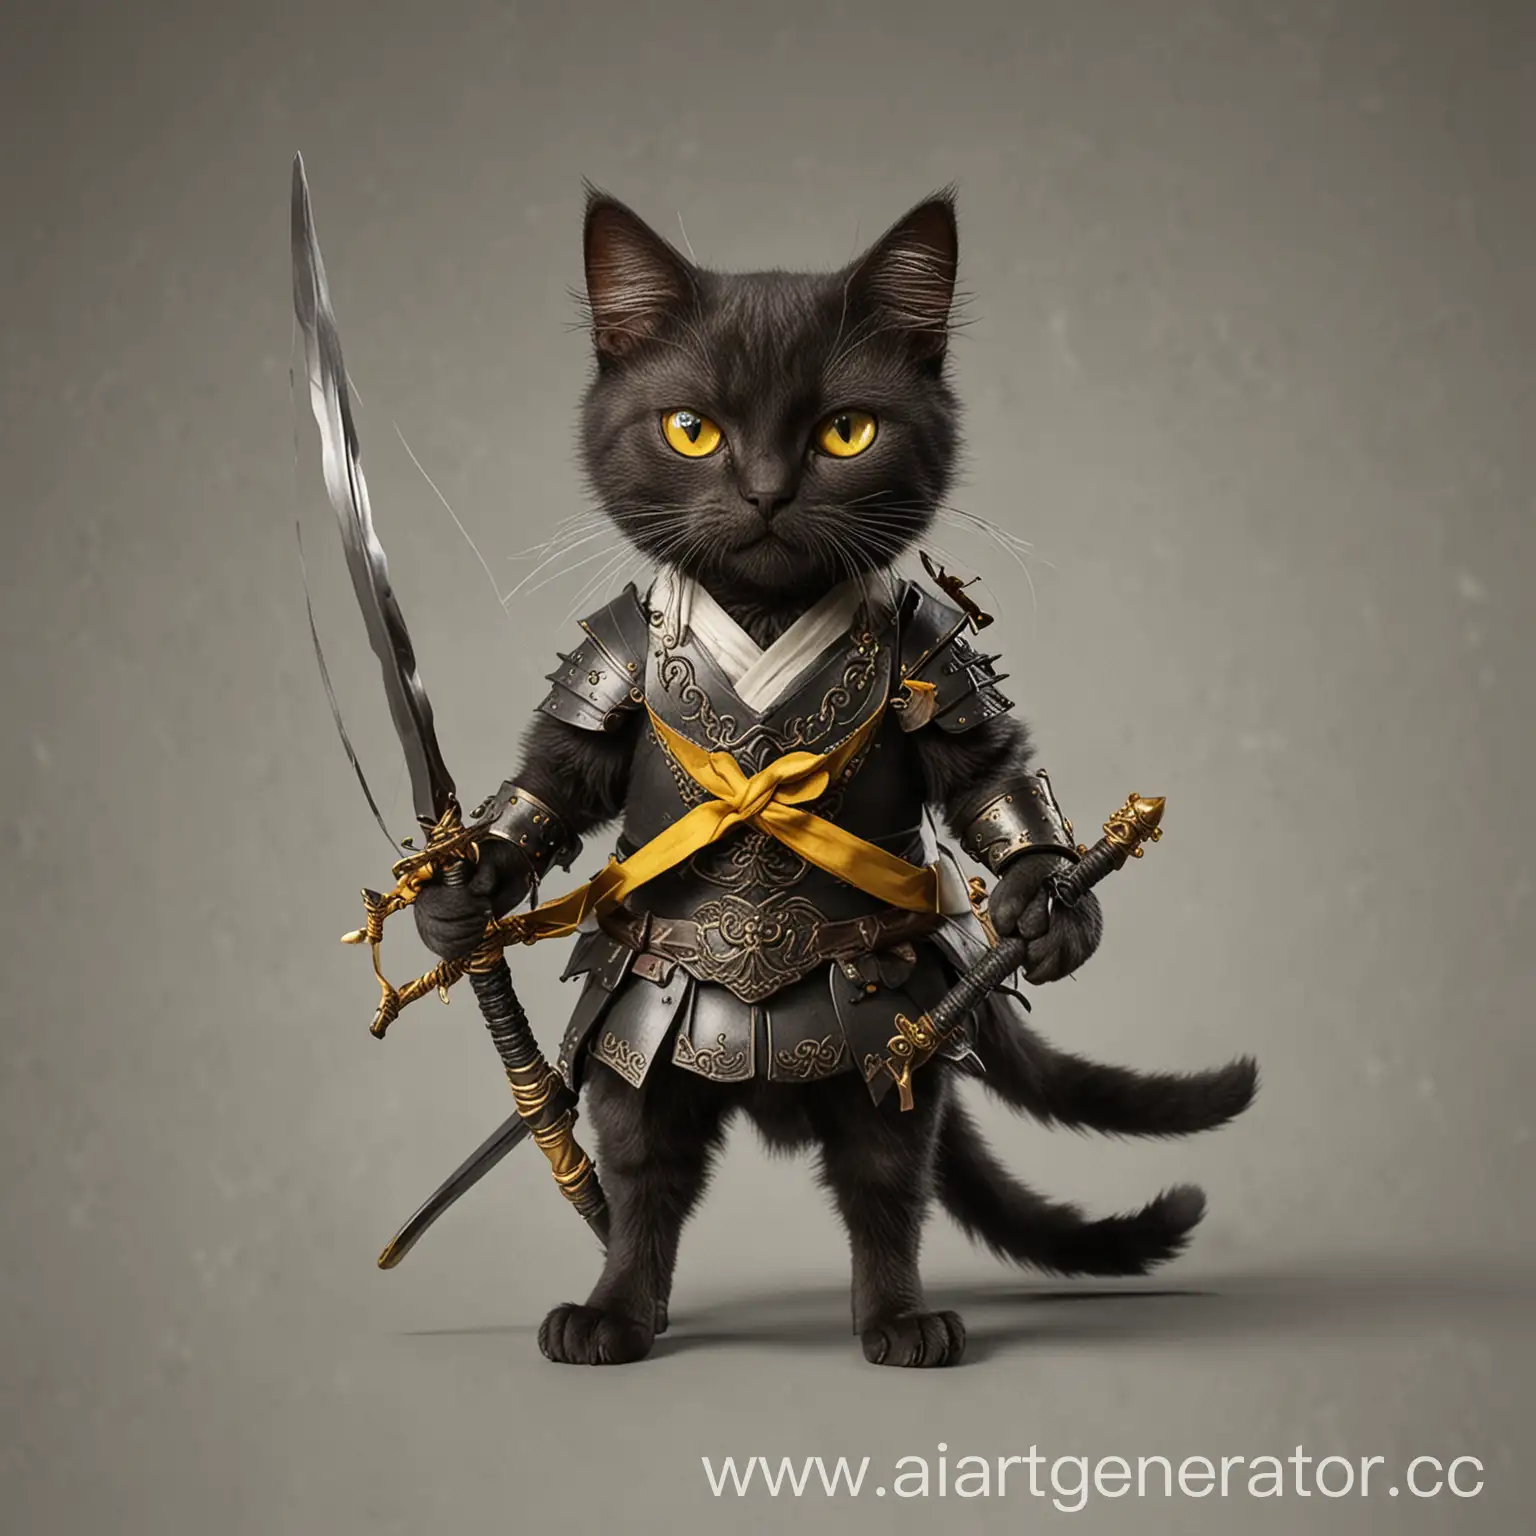 Cat-with-Two-Black-Legs-and-Yellow-Eyes-Holding-Swords-and-Bow